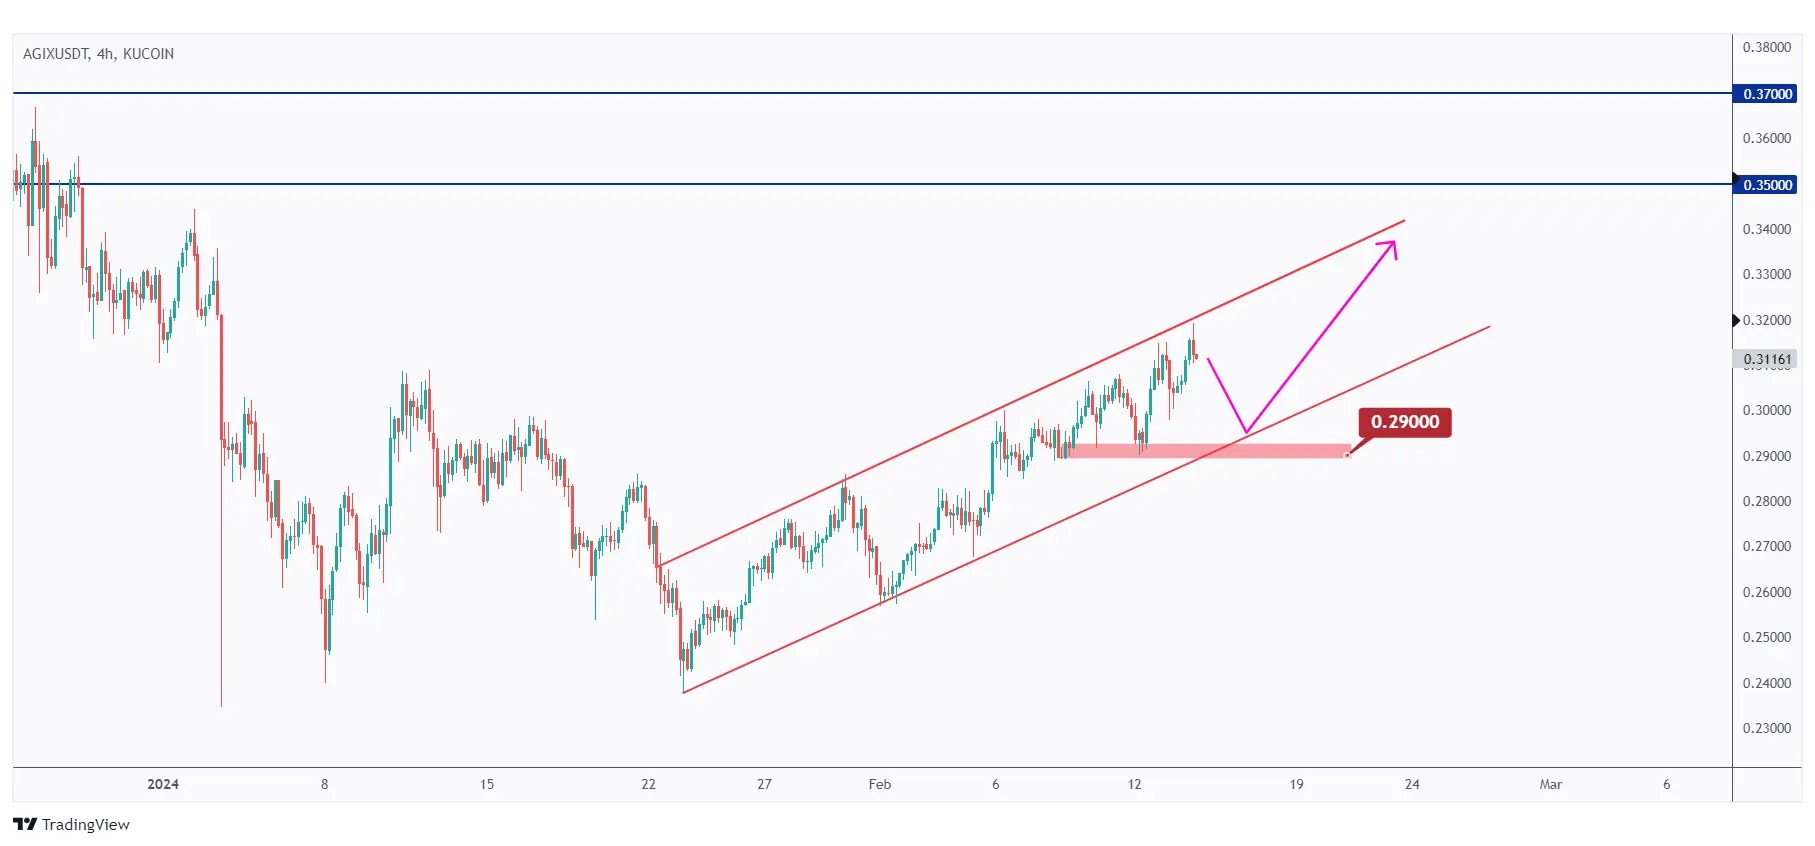 AGIX 4h chart overall bullish trading inside a rising channel as long as the $0.29 holds.